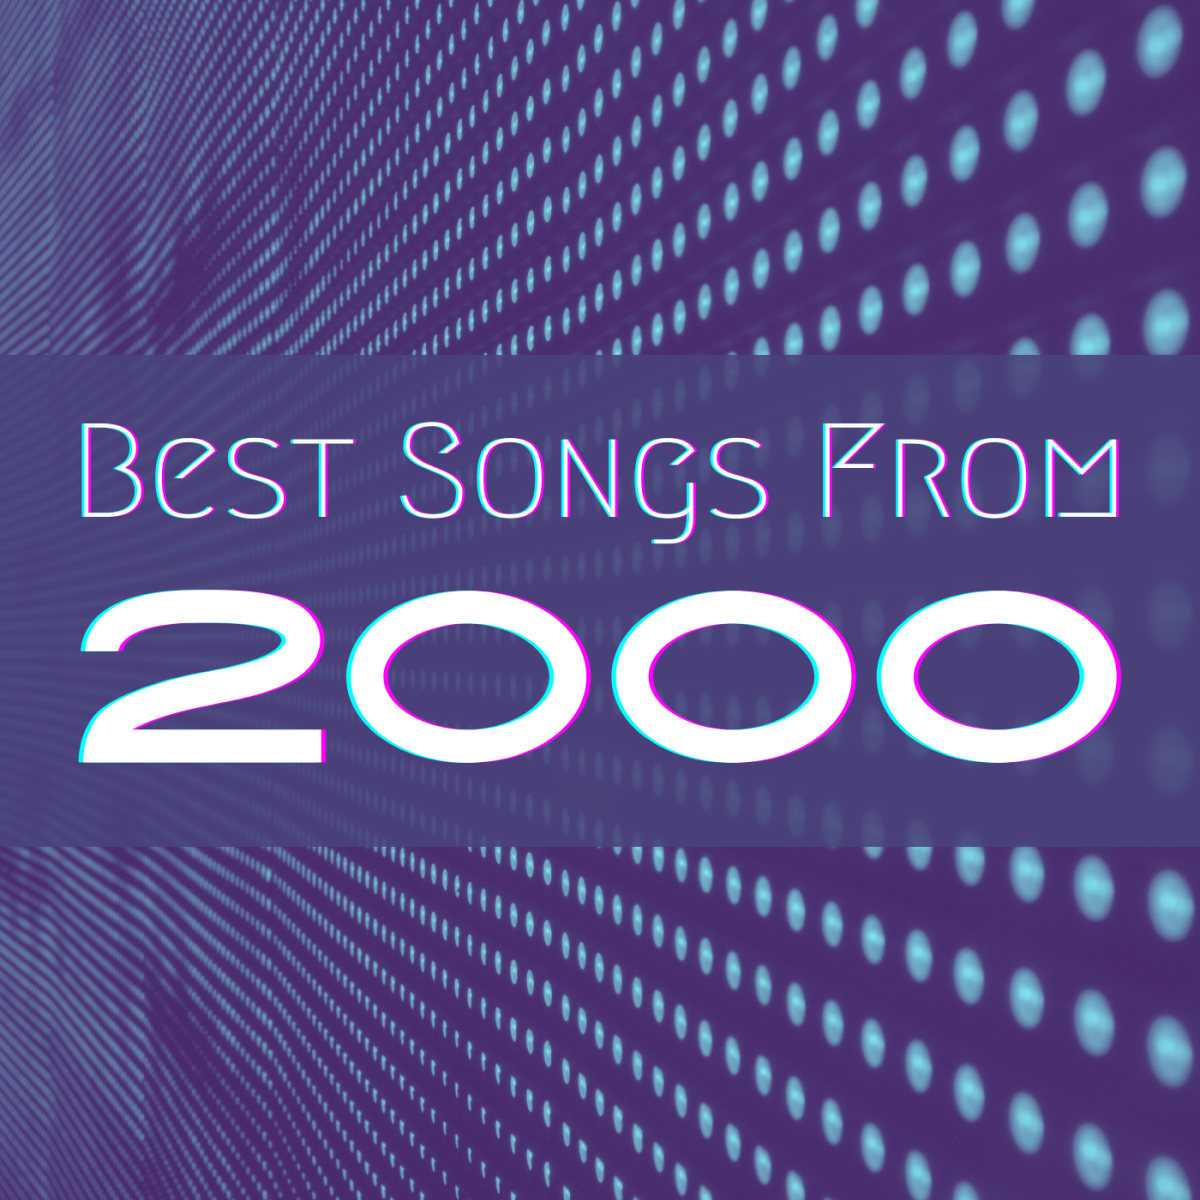 Relive some of the best songs from the year 2000!